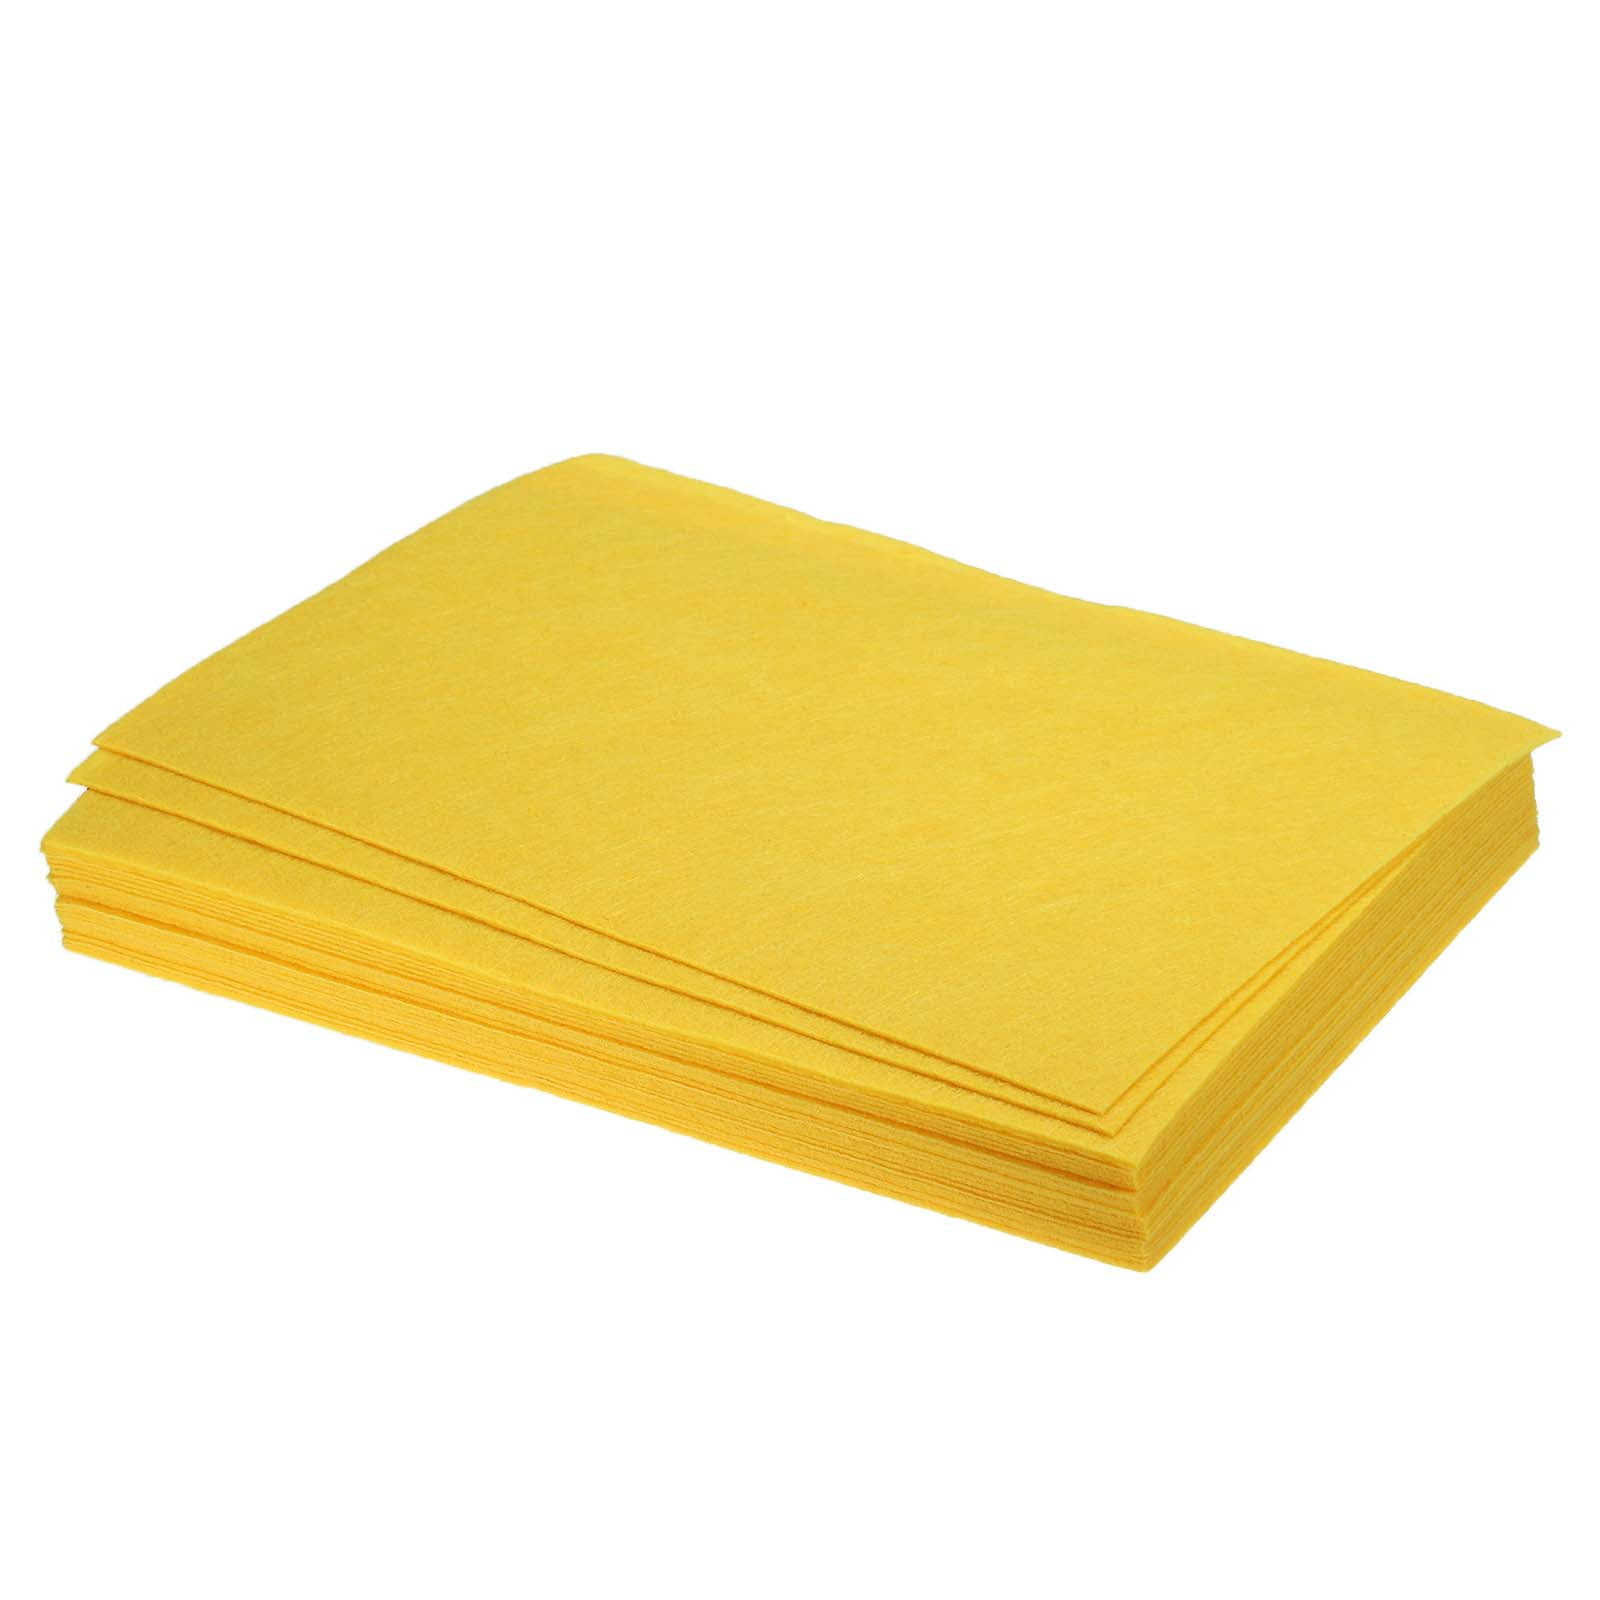 Threadart Premium Felt Sheets - 50 Sheets - 12 x 12 - Light Yellow | Soft  Wool-Like Feel | 1.2mm Thick for DIY Crafts, Sewing, Crafting Projects 